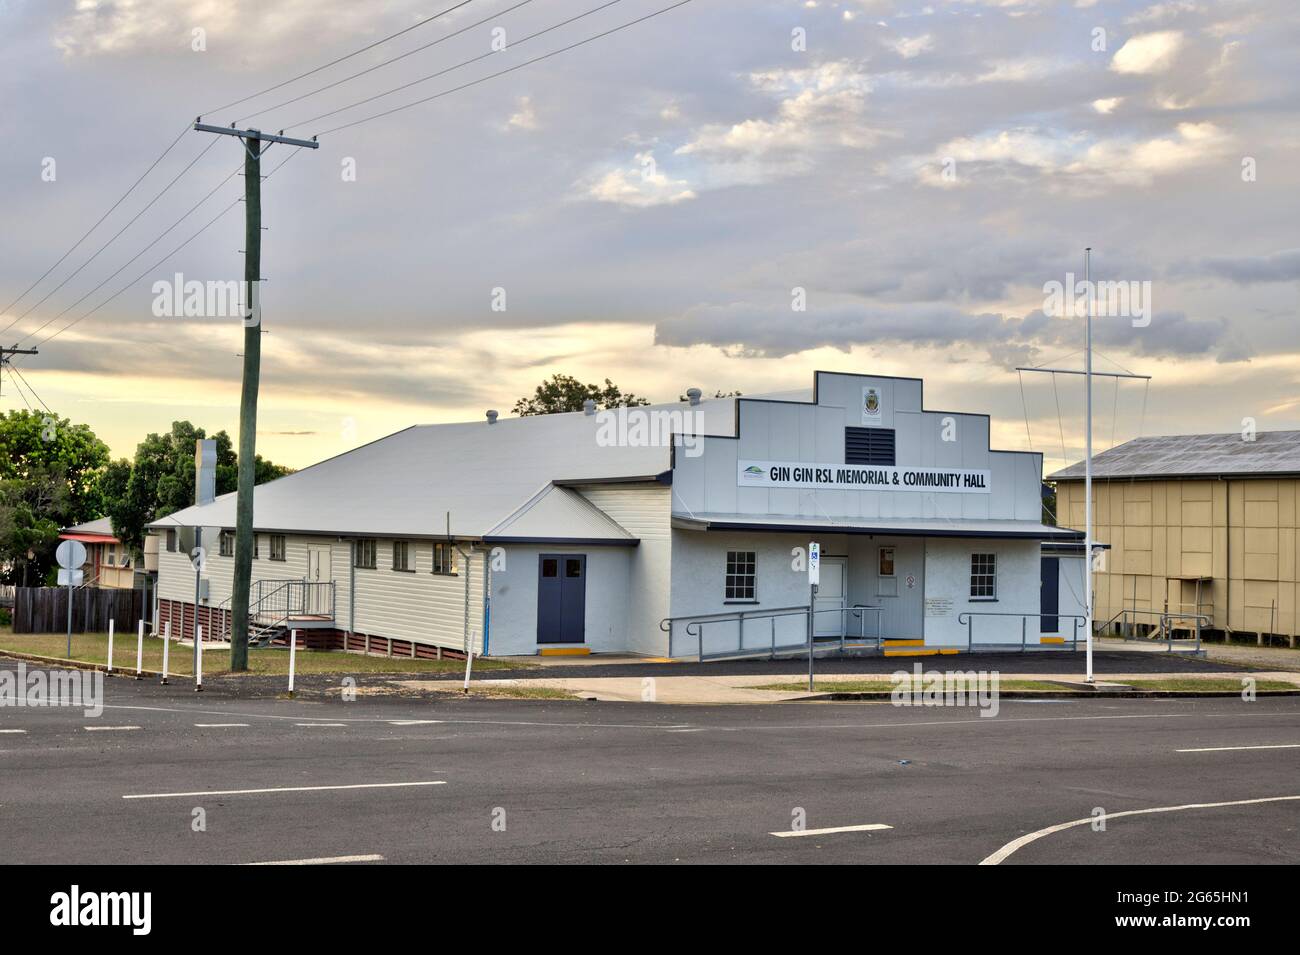 The Gin Gin RSL Memorial and Community Hall on Milden Street Gin Gin Queensland Australia Stock Photo